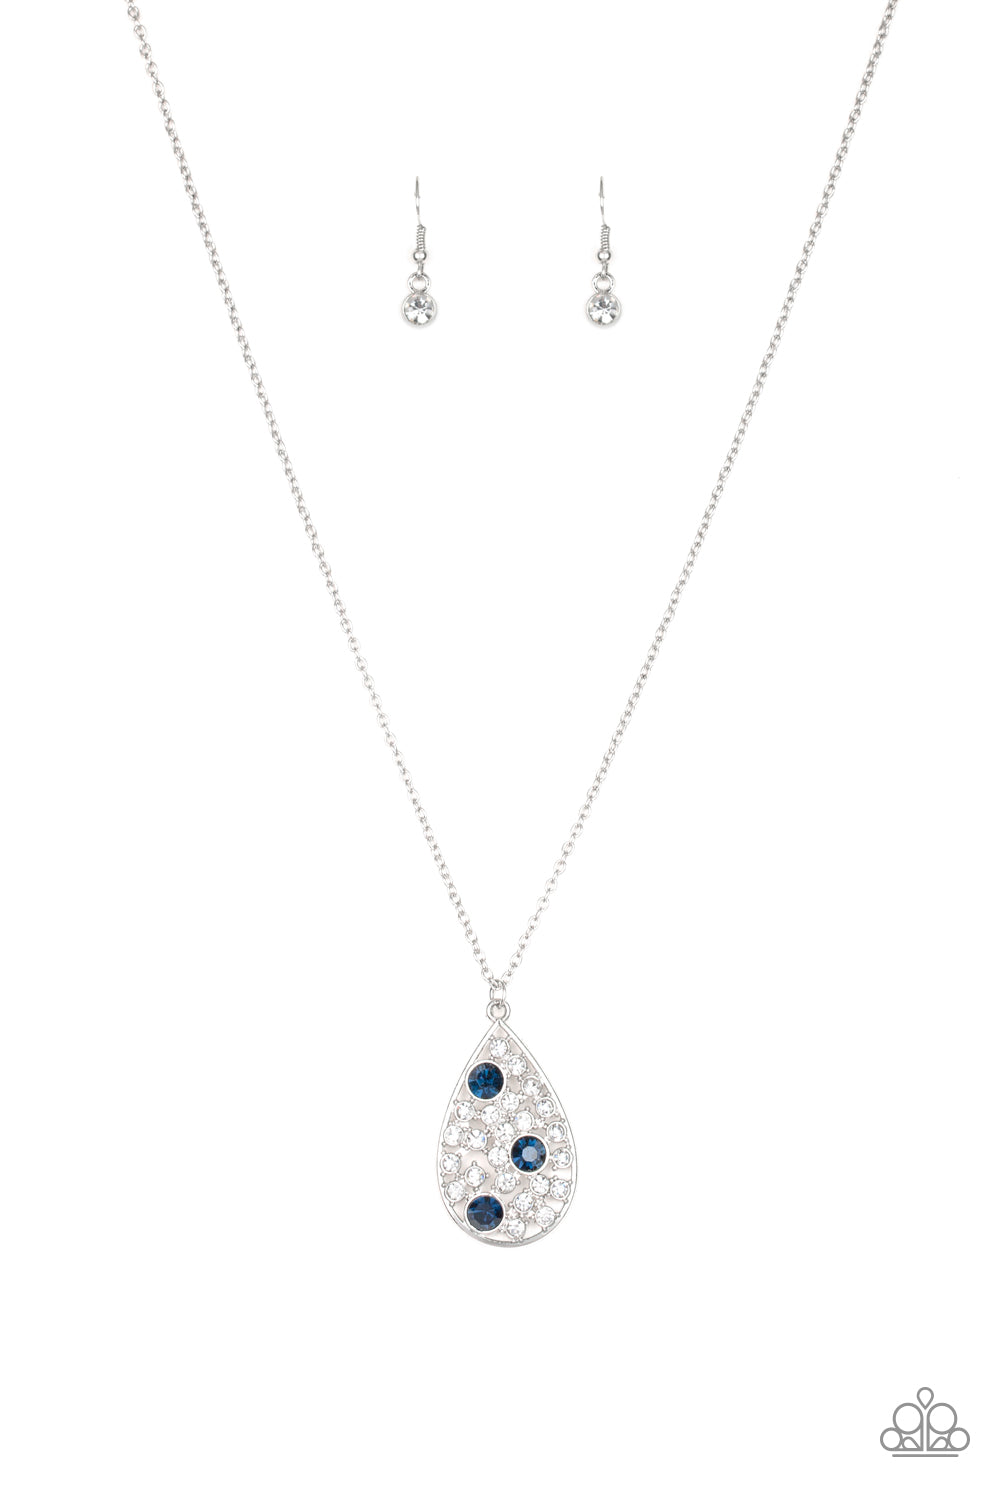 Sparkle All The Way Blue Paparazzi Necklace Cashmere Pink Jewels - Cashmere Pink Jewels & Accessories, Cashmere Pink Jewels & Accessories - Paparazzi